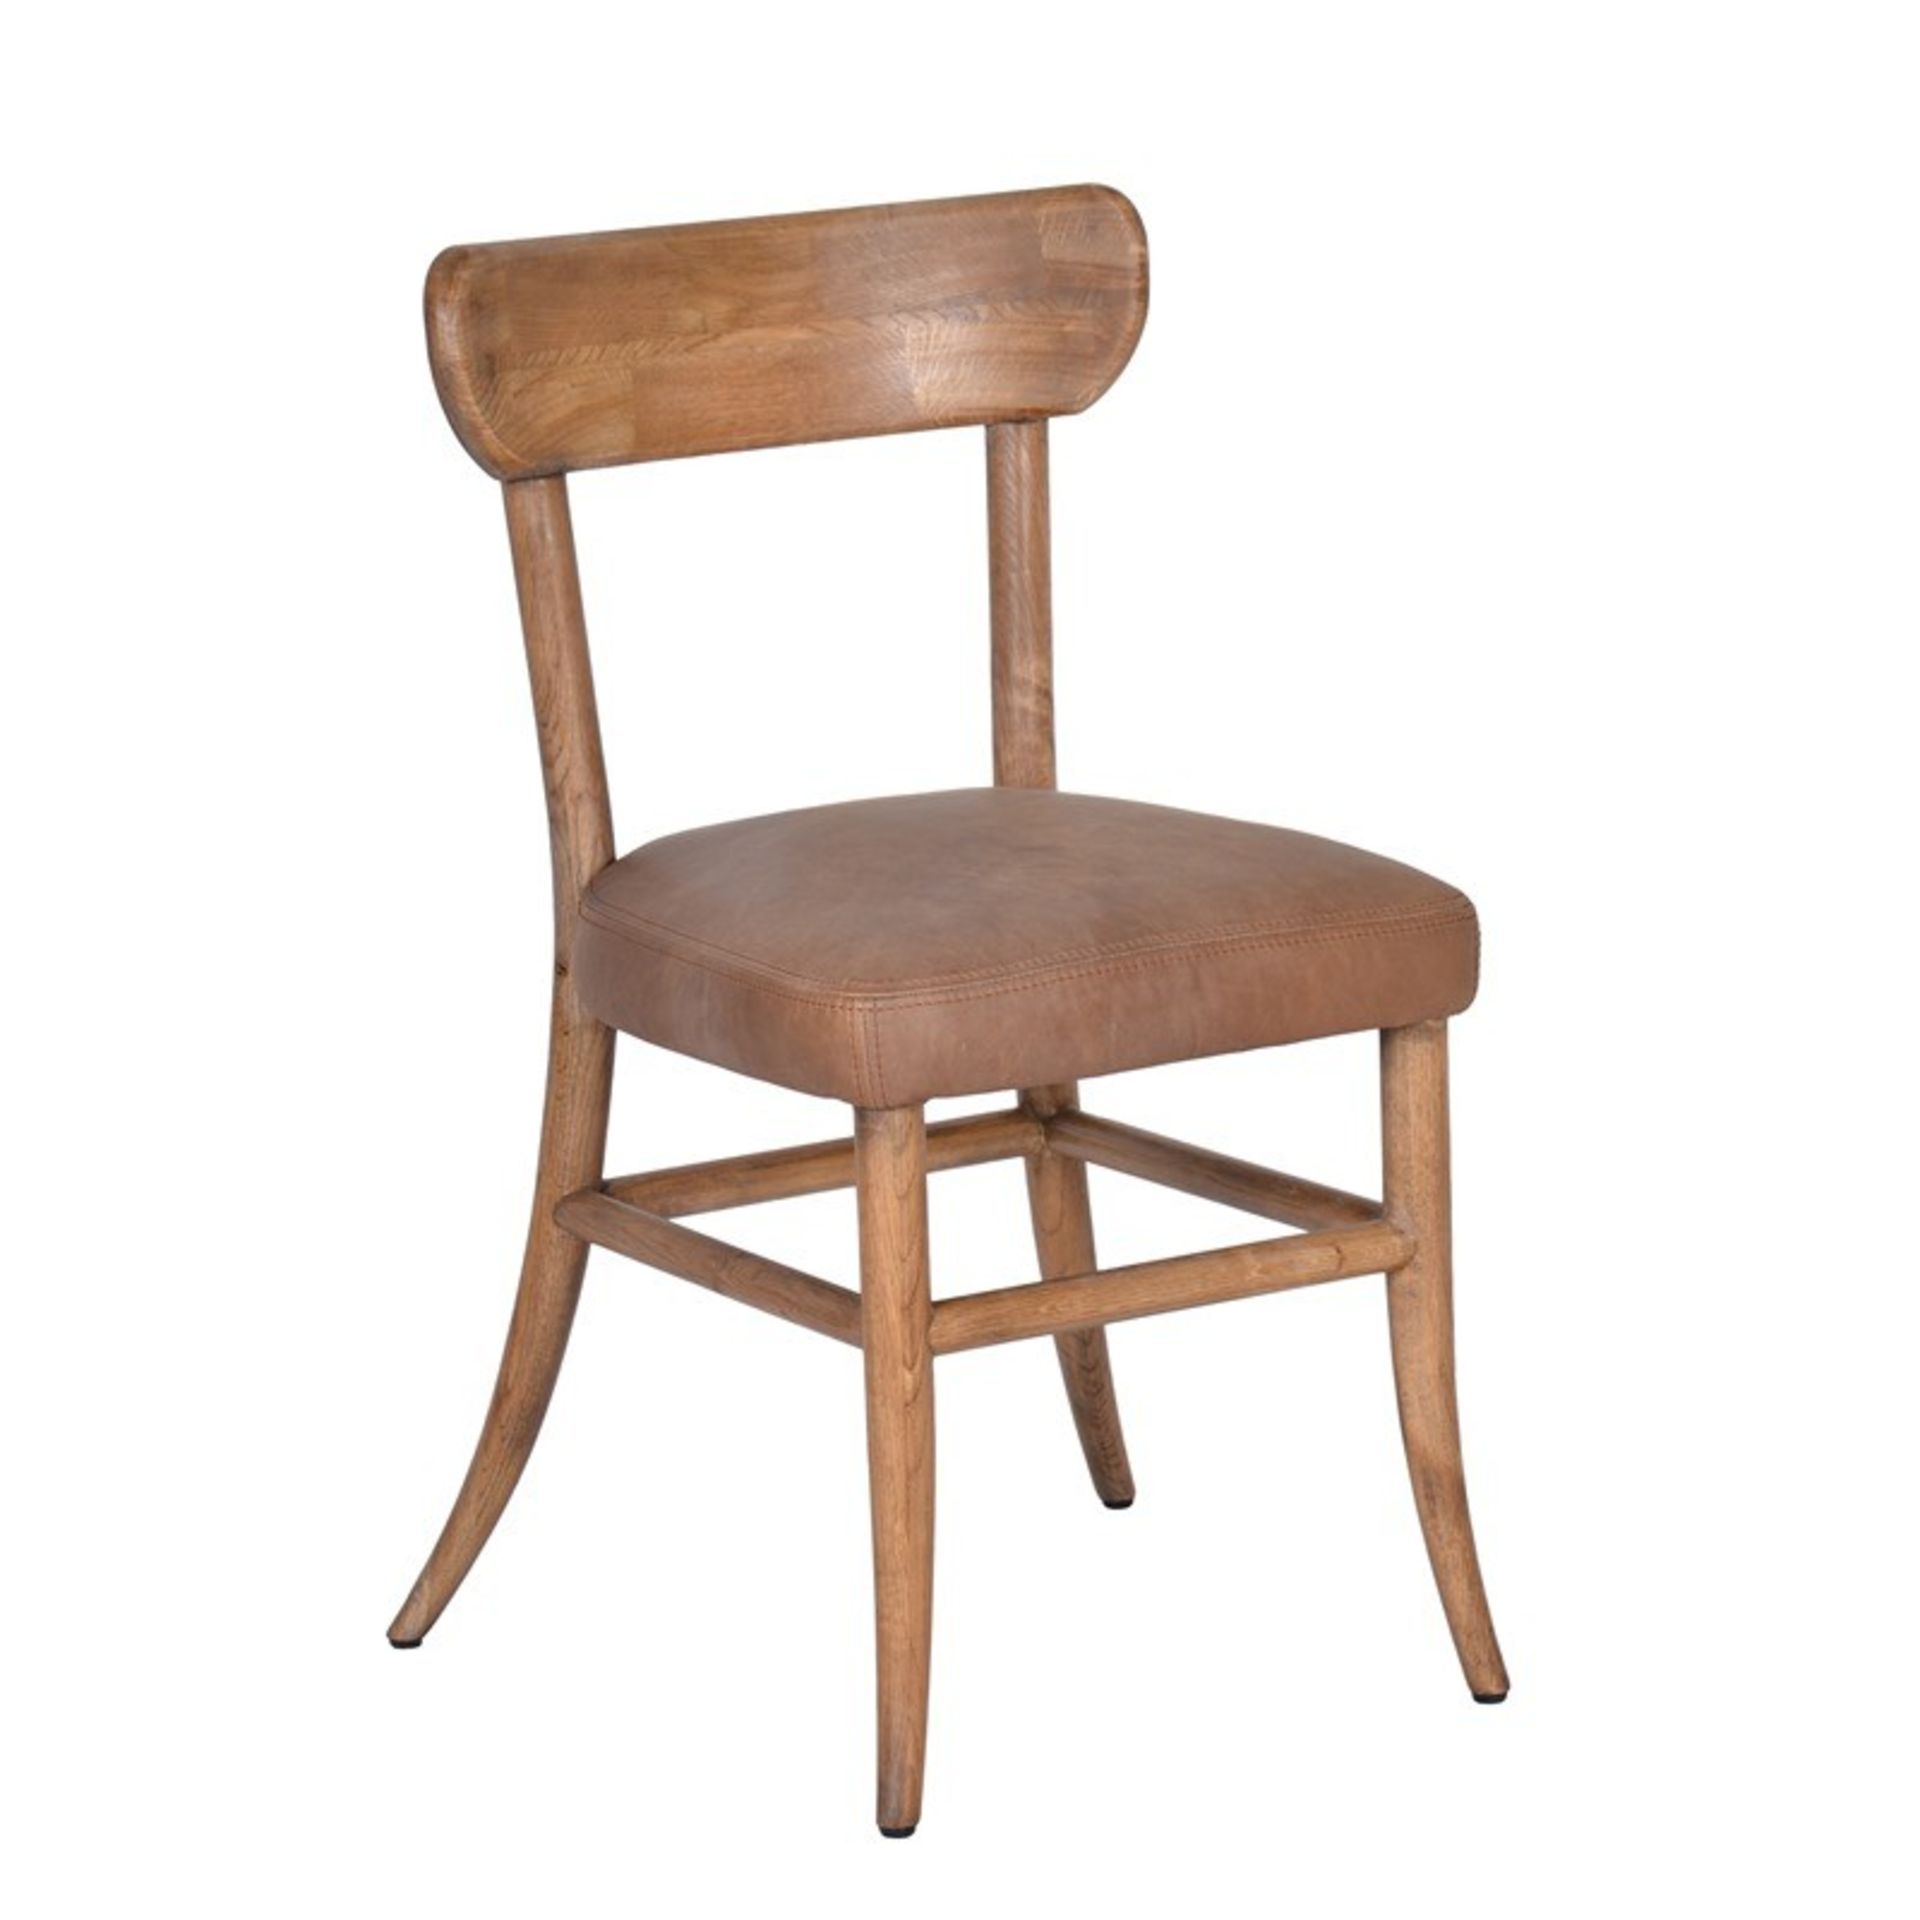 Sansa Dining Chair Destroyed Black & Weathered Oak 52 X 53 X 83 5cm Relaxed Dining Under The Swaying - Image 2 of 2